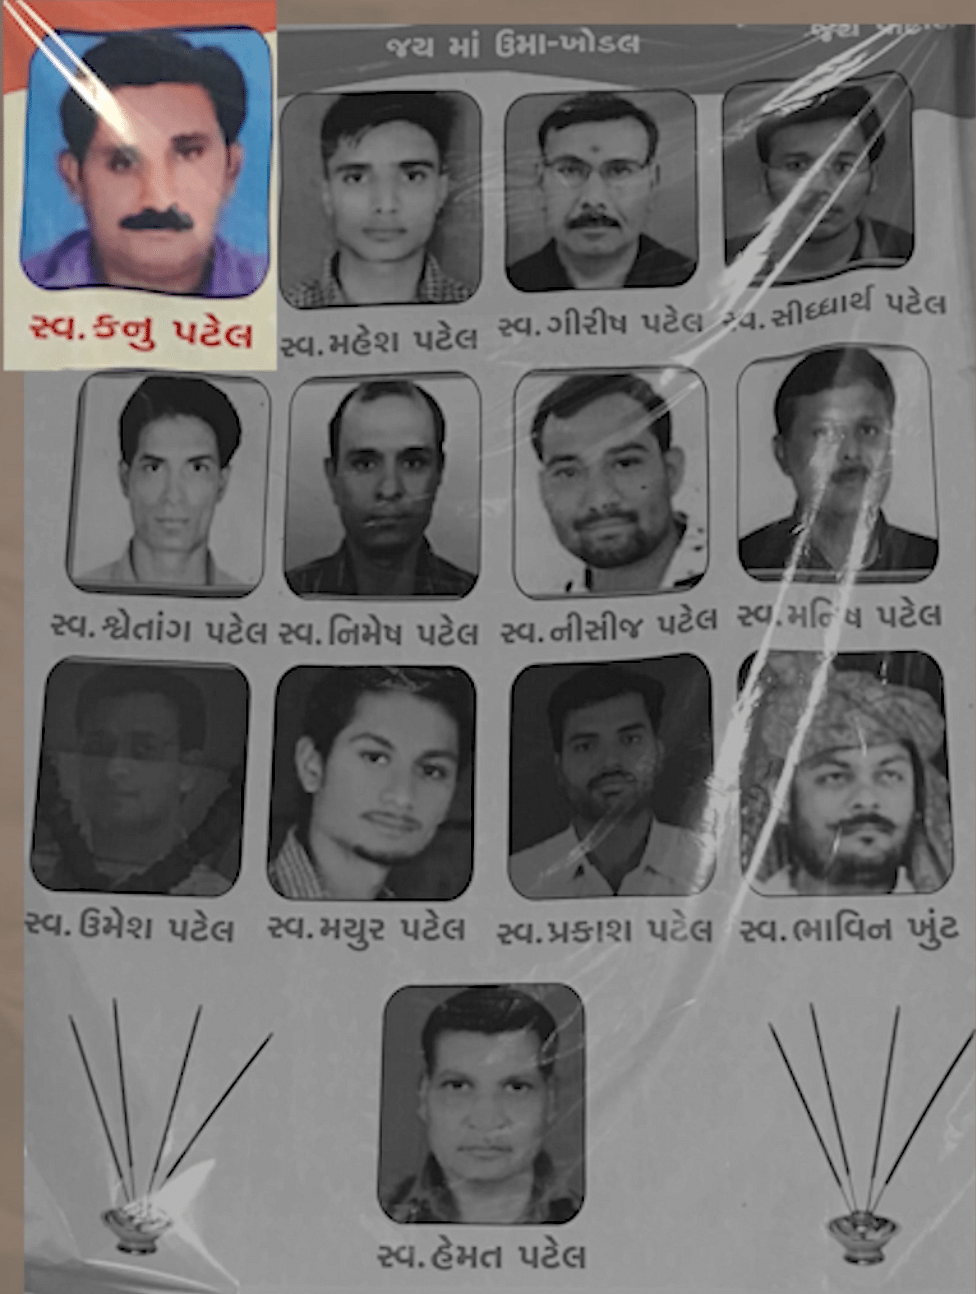 Families of those killed during Patidar protests in Gujarat reflect upon its consequences, Hardik Patel, and more.